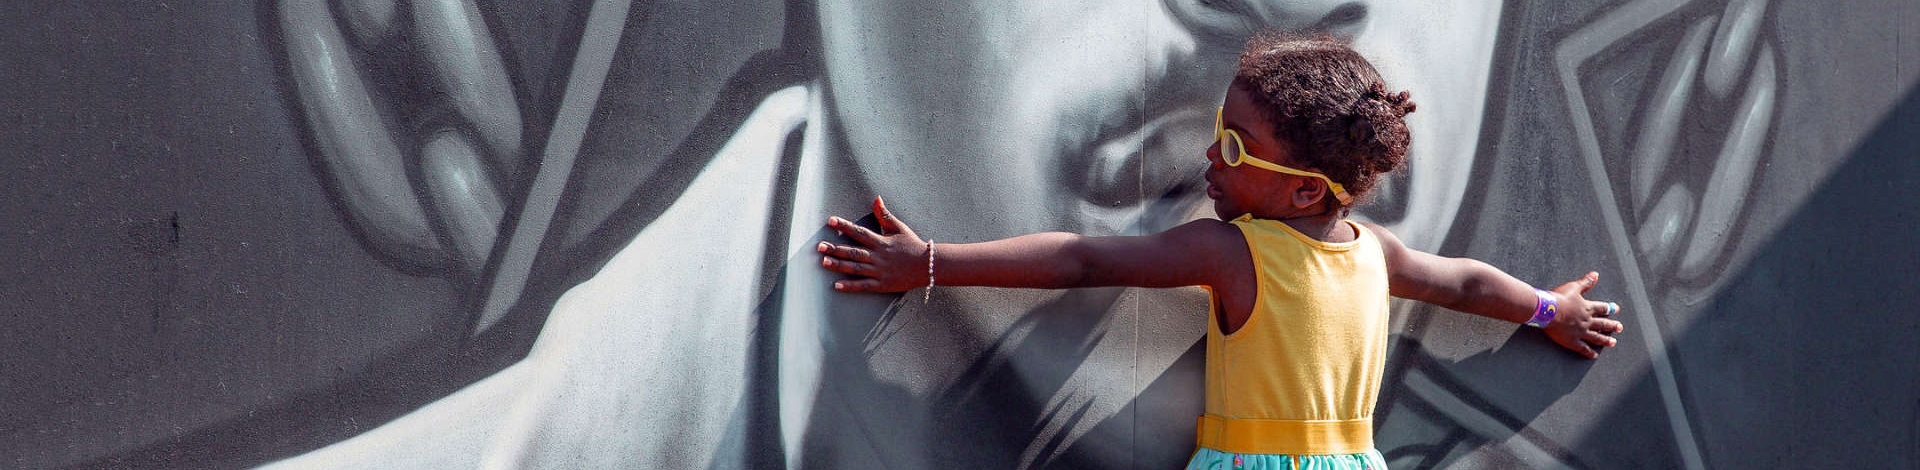 photo of a black girl in yellow glasses and a yellow dress holding her arms open to embrace a black and white painted mural depicting a black man's face